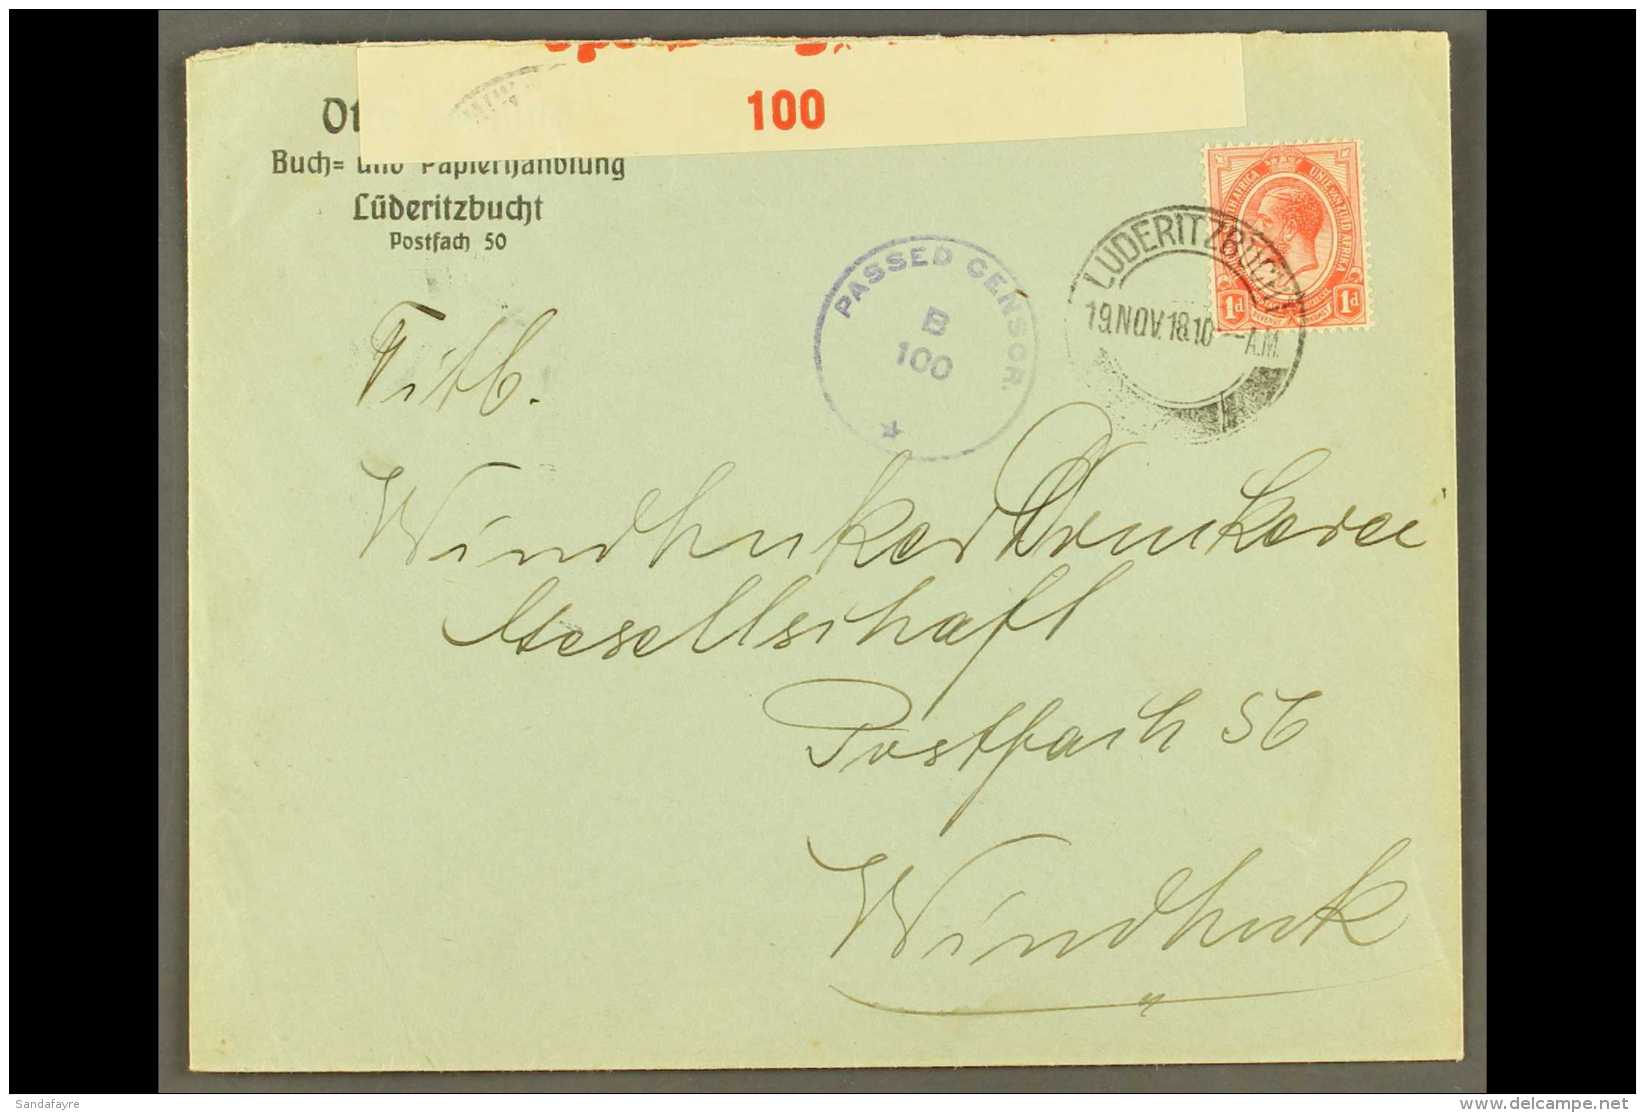 1918 (19 Nov) Printed Cover To Windhuk Bearing 1d Union Stamp Tied By "LUDERITZBUCHT" Cds Cancellation, Putzel... - Südwestafrika (1923-1990)